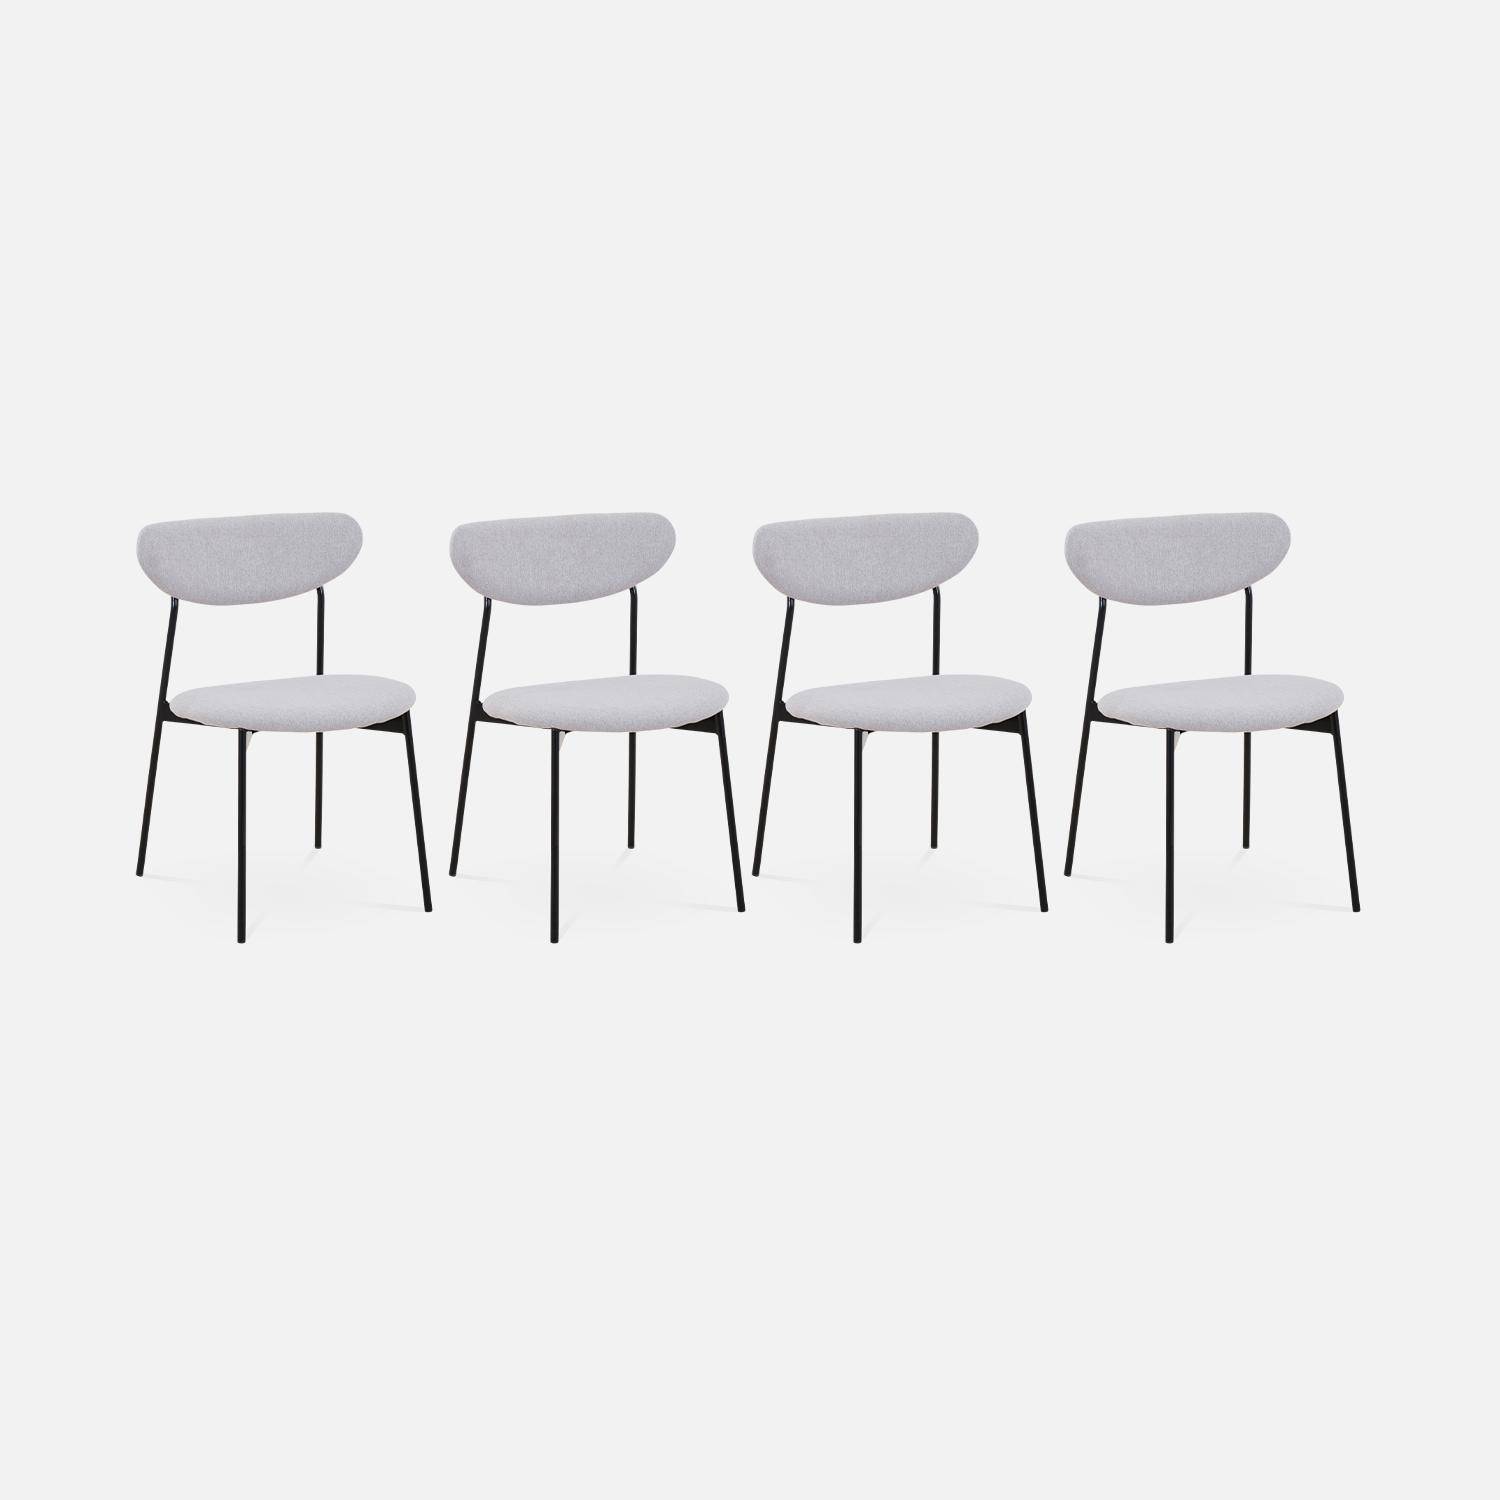 Set of 4 retro style dining chairs with steel legs - Arty - Light Grey,sweeek,Photo3